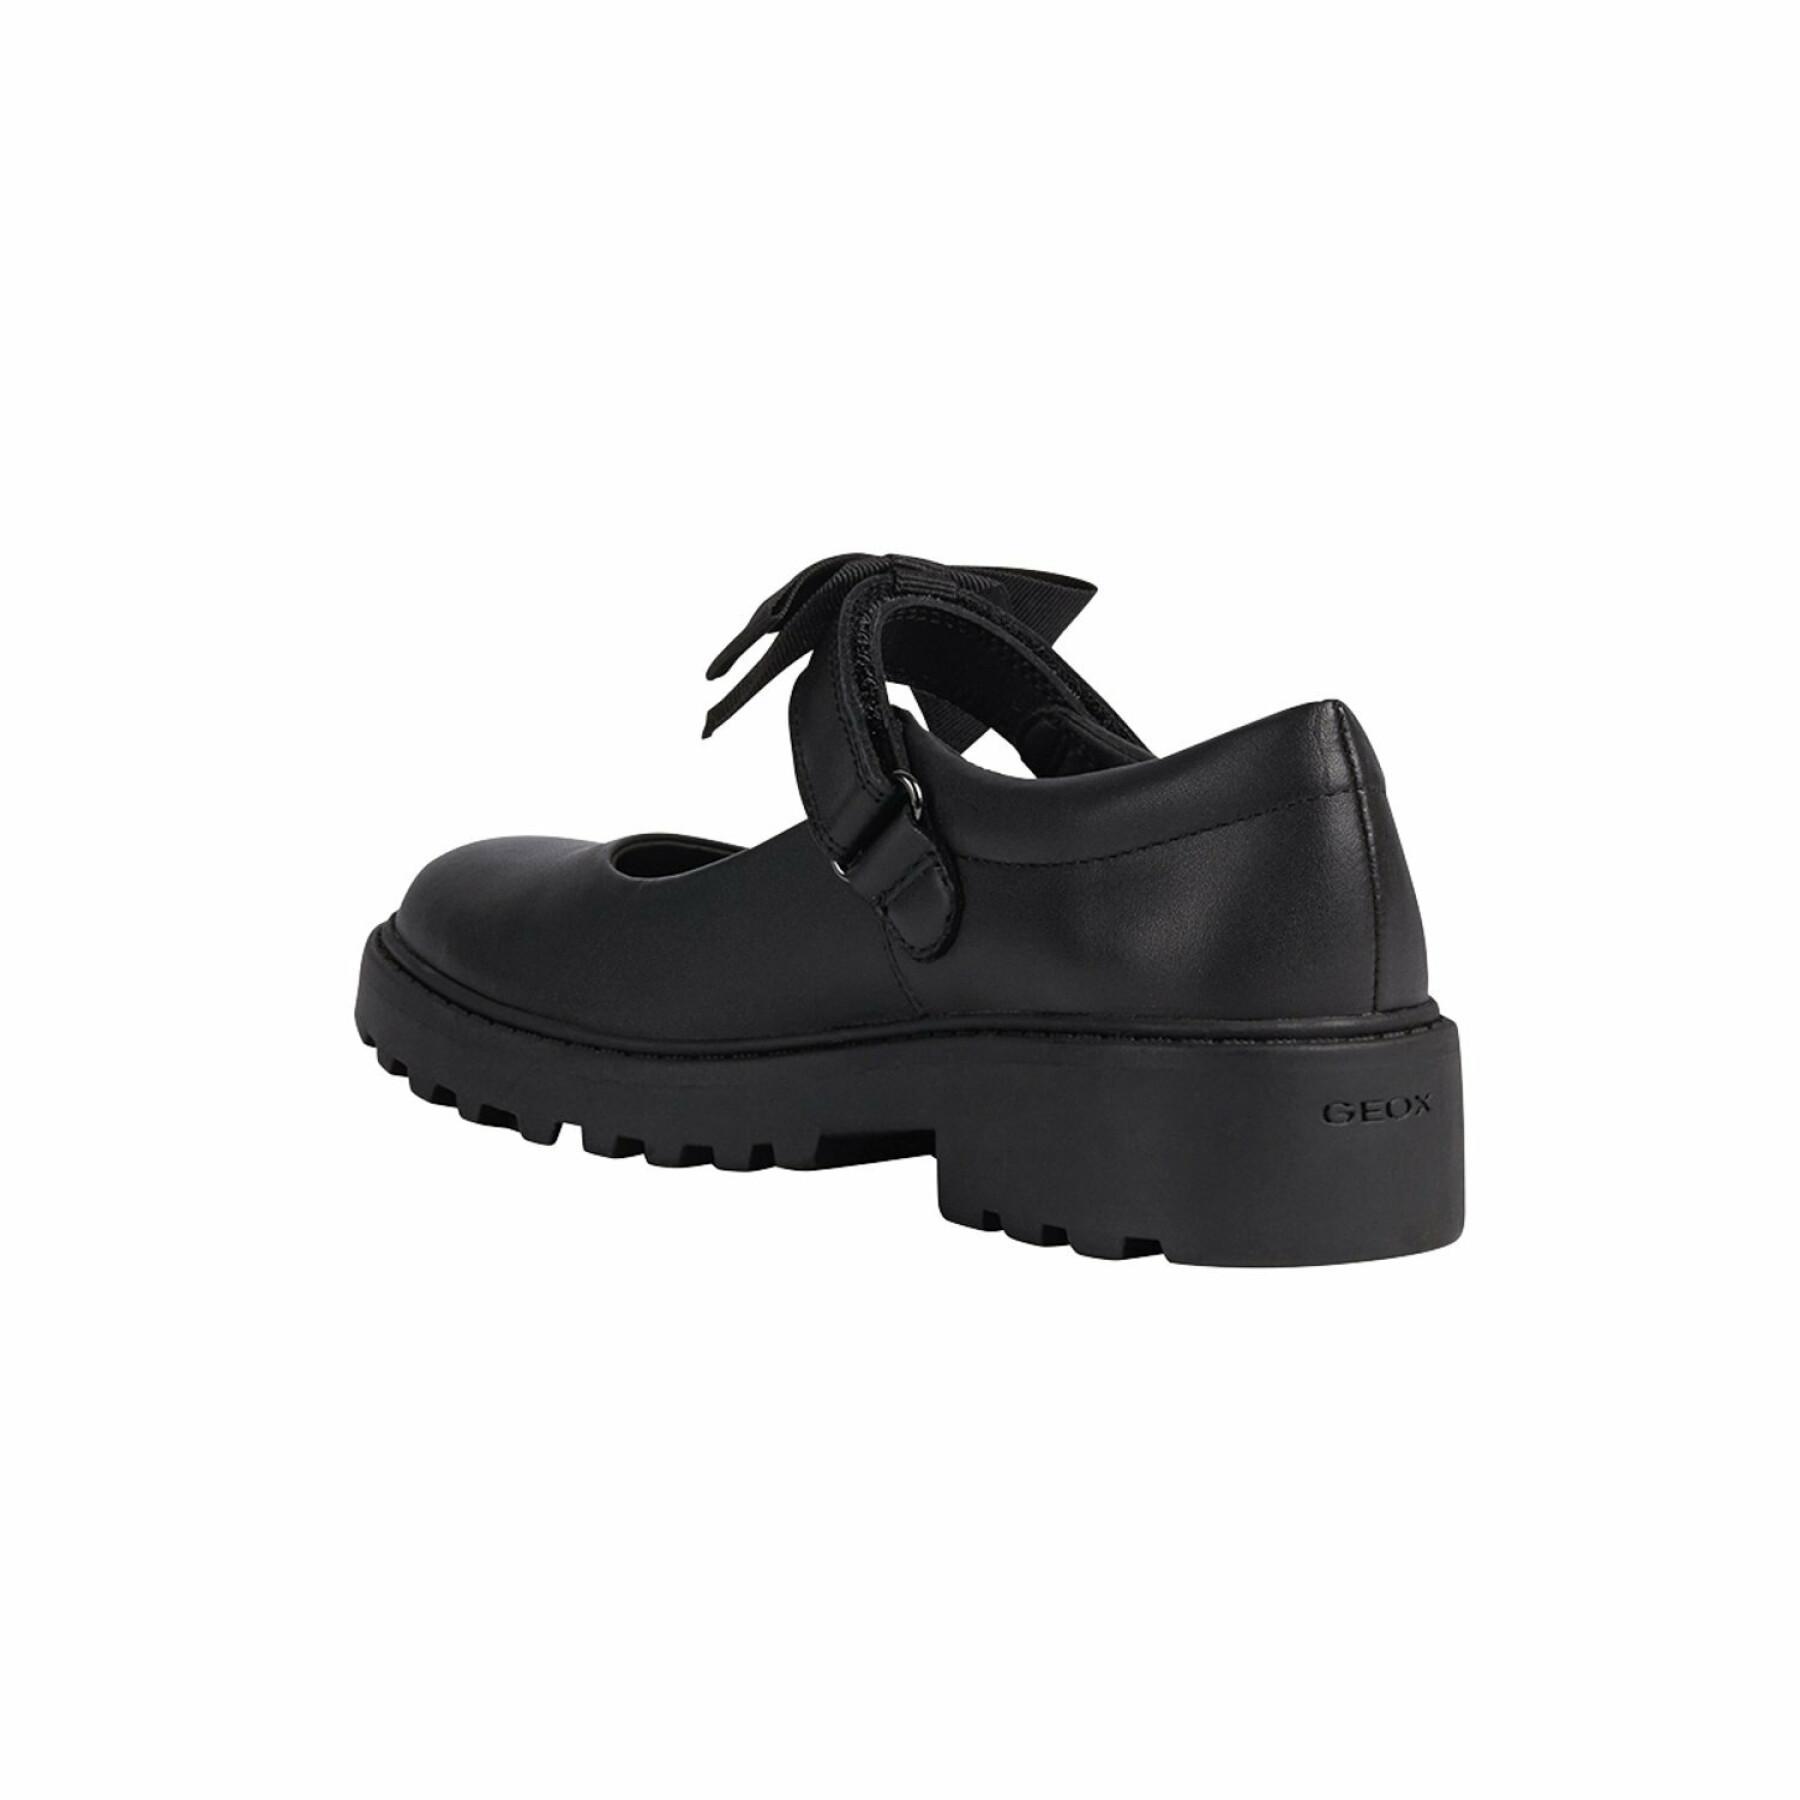 Girl's moccasins Geox Casey